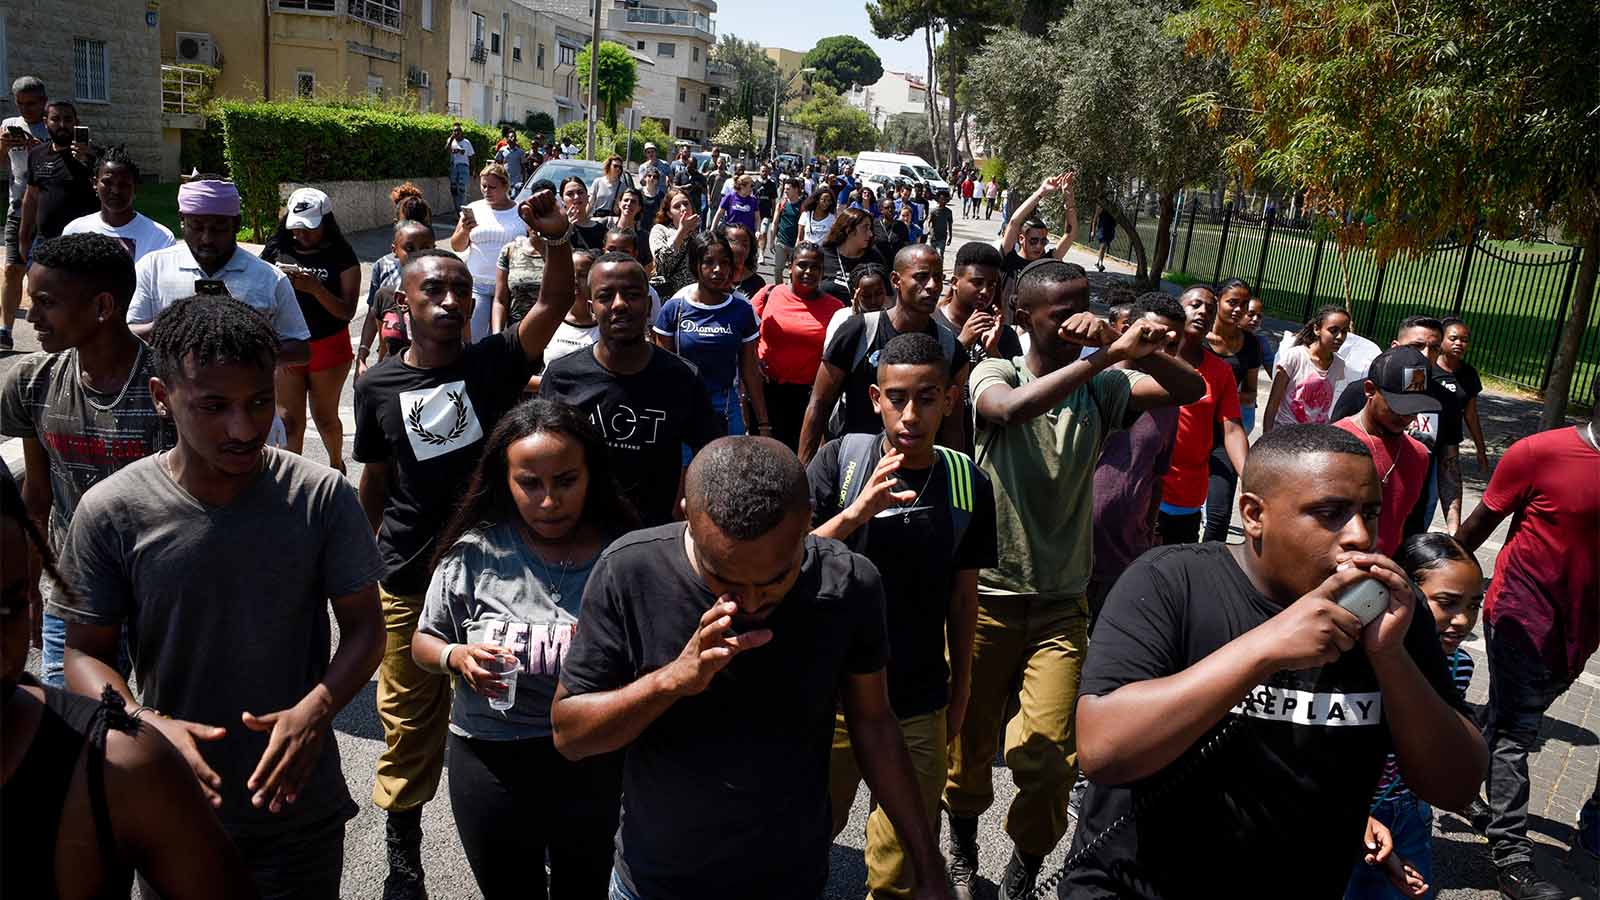 Protest after the death of Salamon Taka, age 19, at the hands of the police. July 1 2019. (Photograph: Meir Vaknin/Flash90).